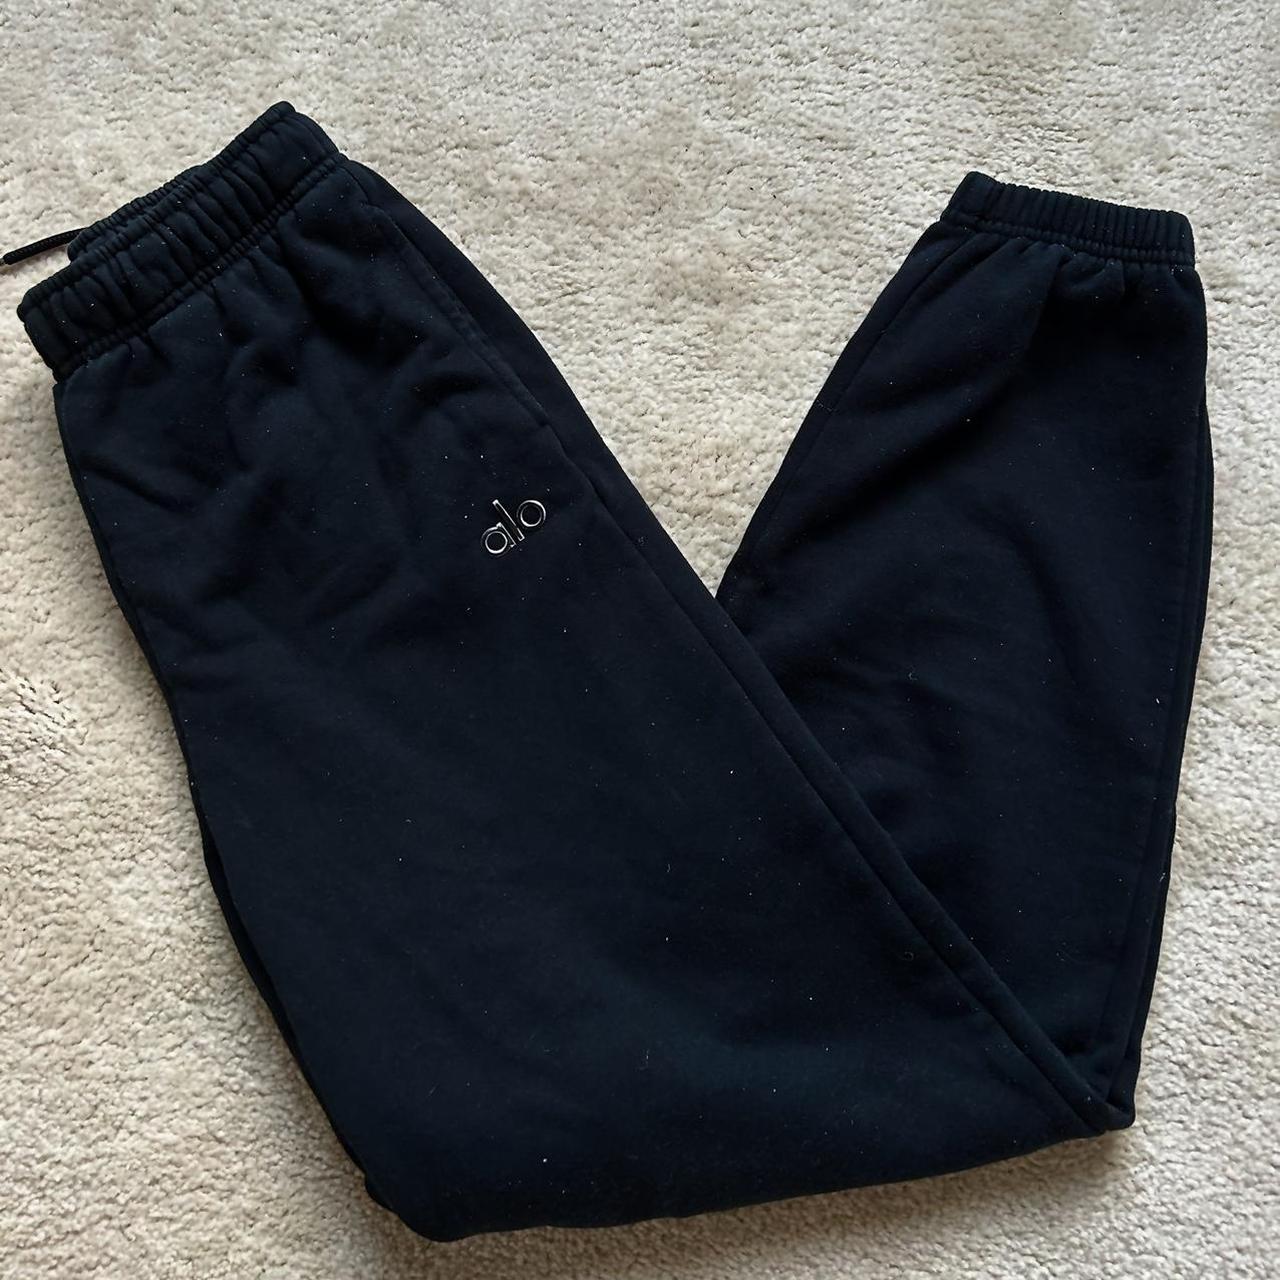 Alo- woman's joggers. Size XS. Extremely - Depop